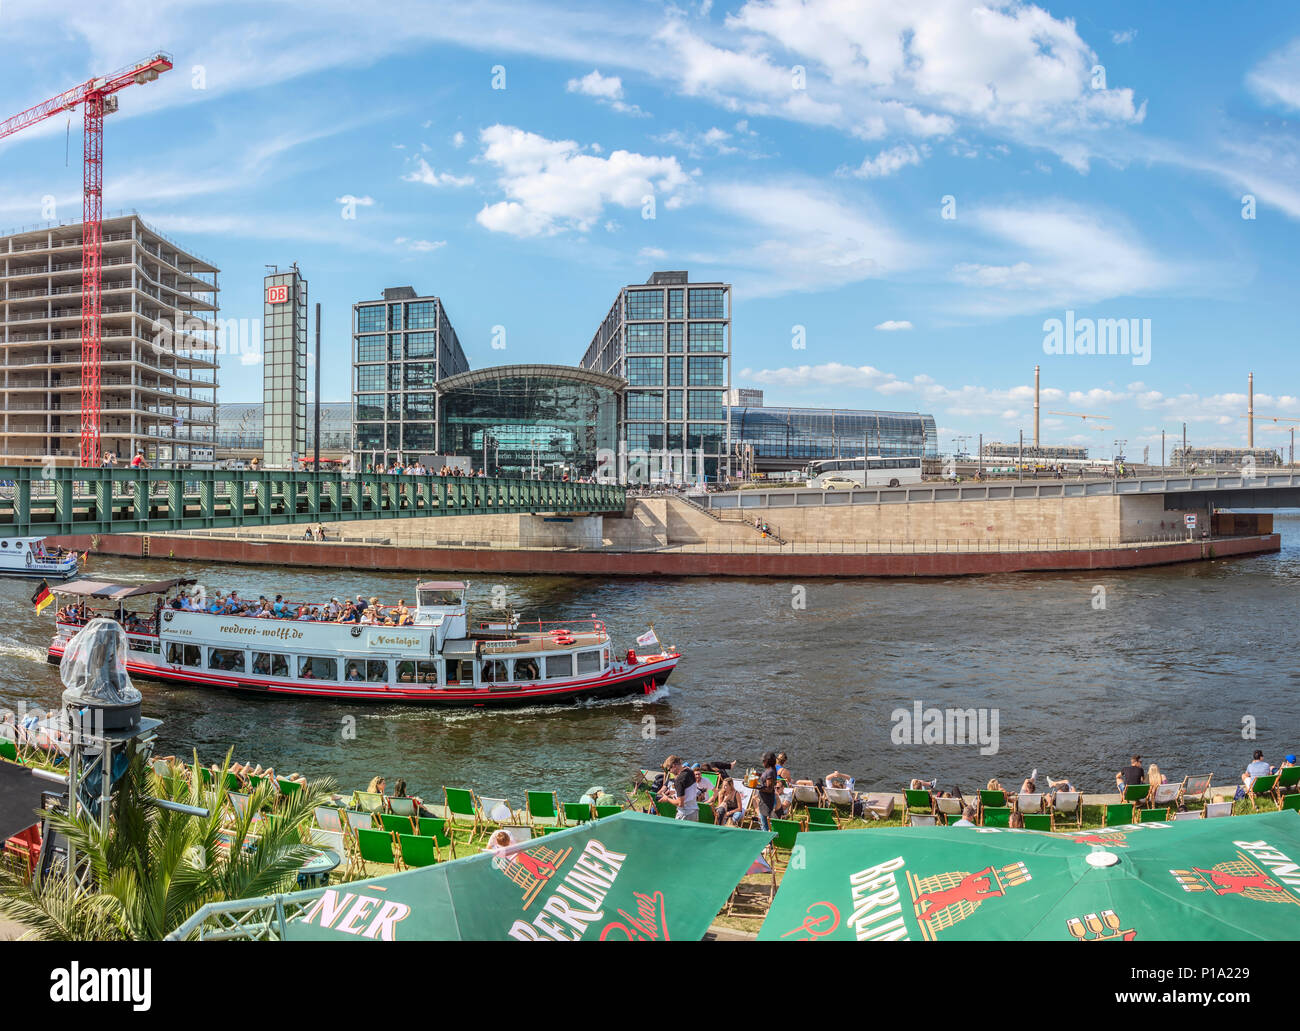 Berlin Riverside outdoor bar at River Spreer in front of the new central railway station, Germany Stock Photo